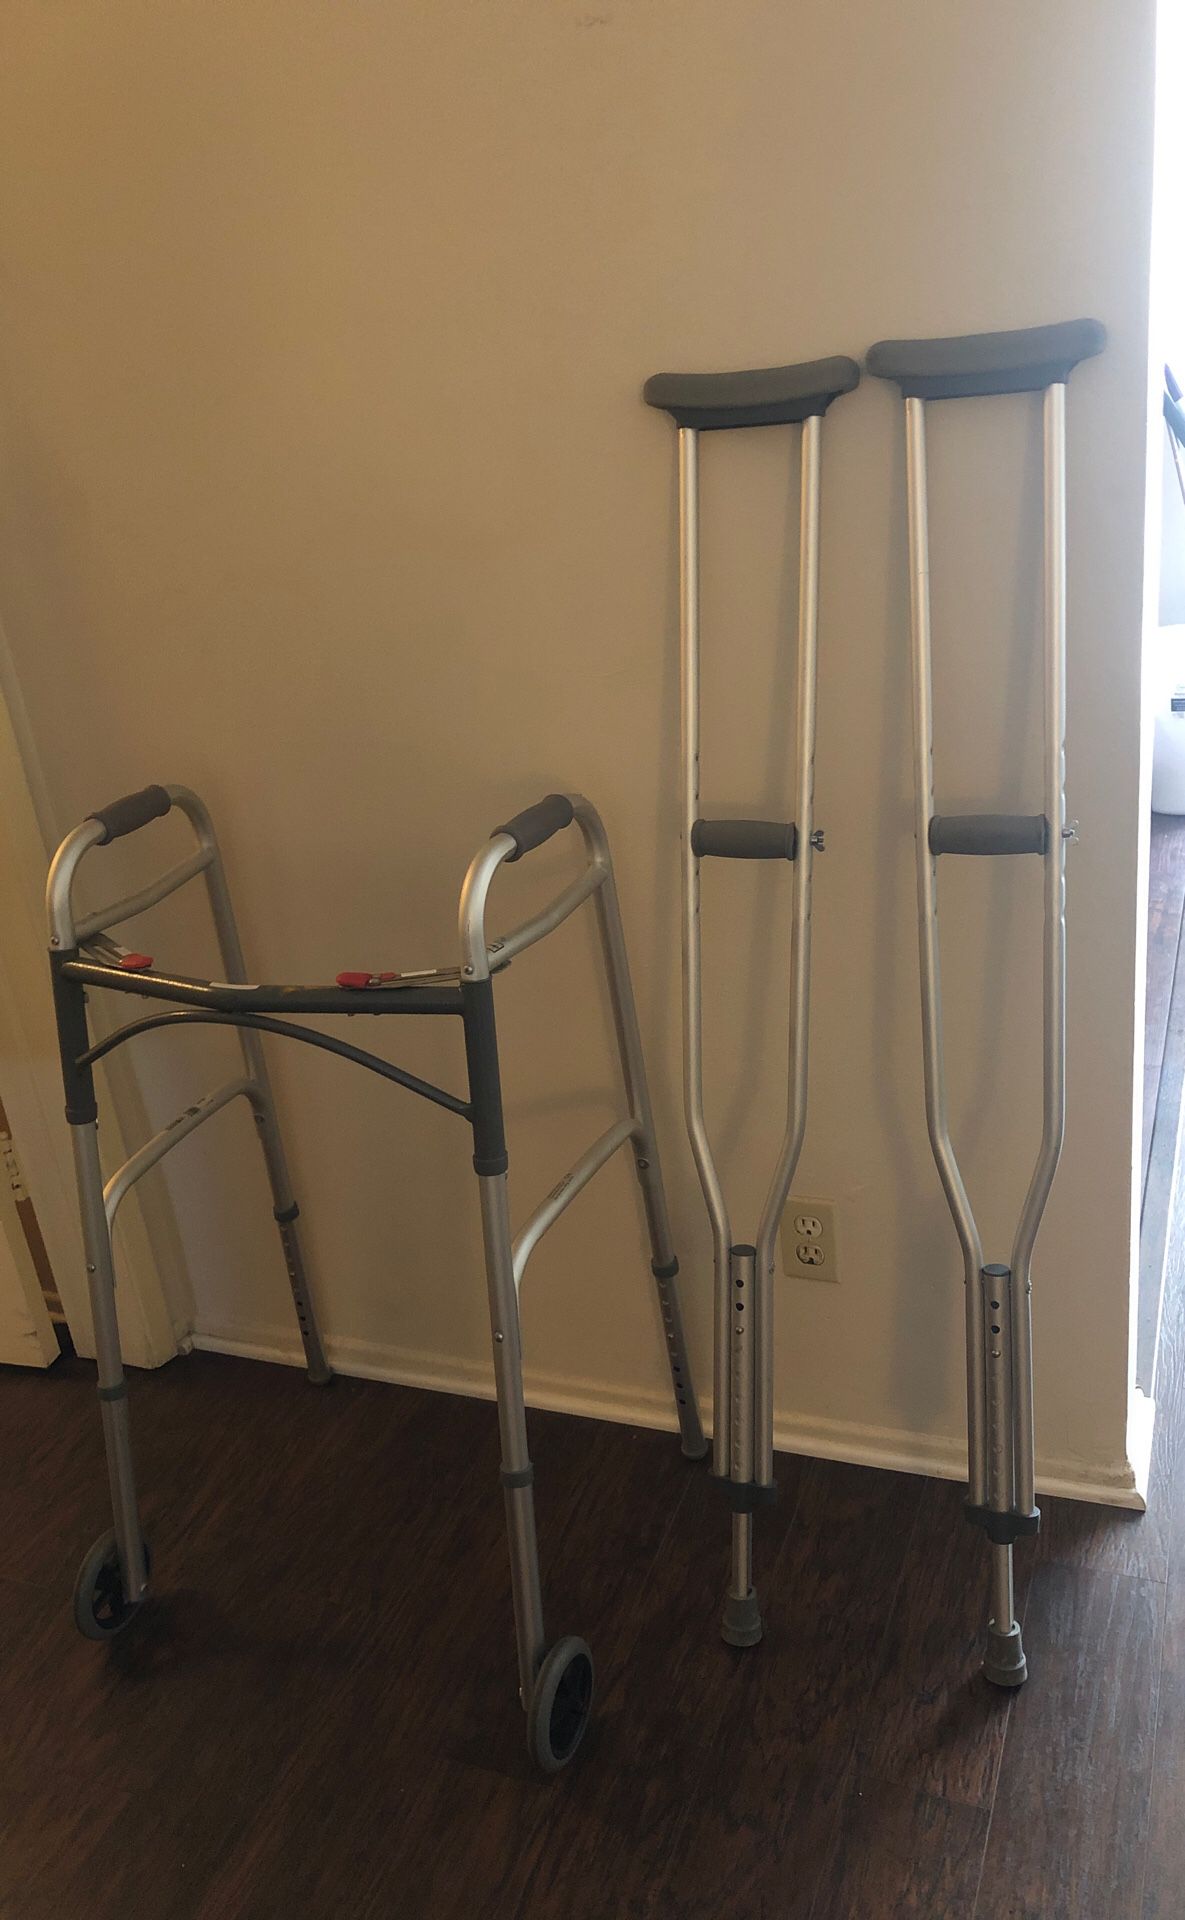 Crutches ONLY - walker is SOLD